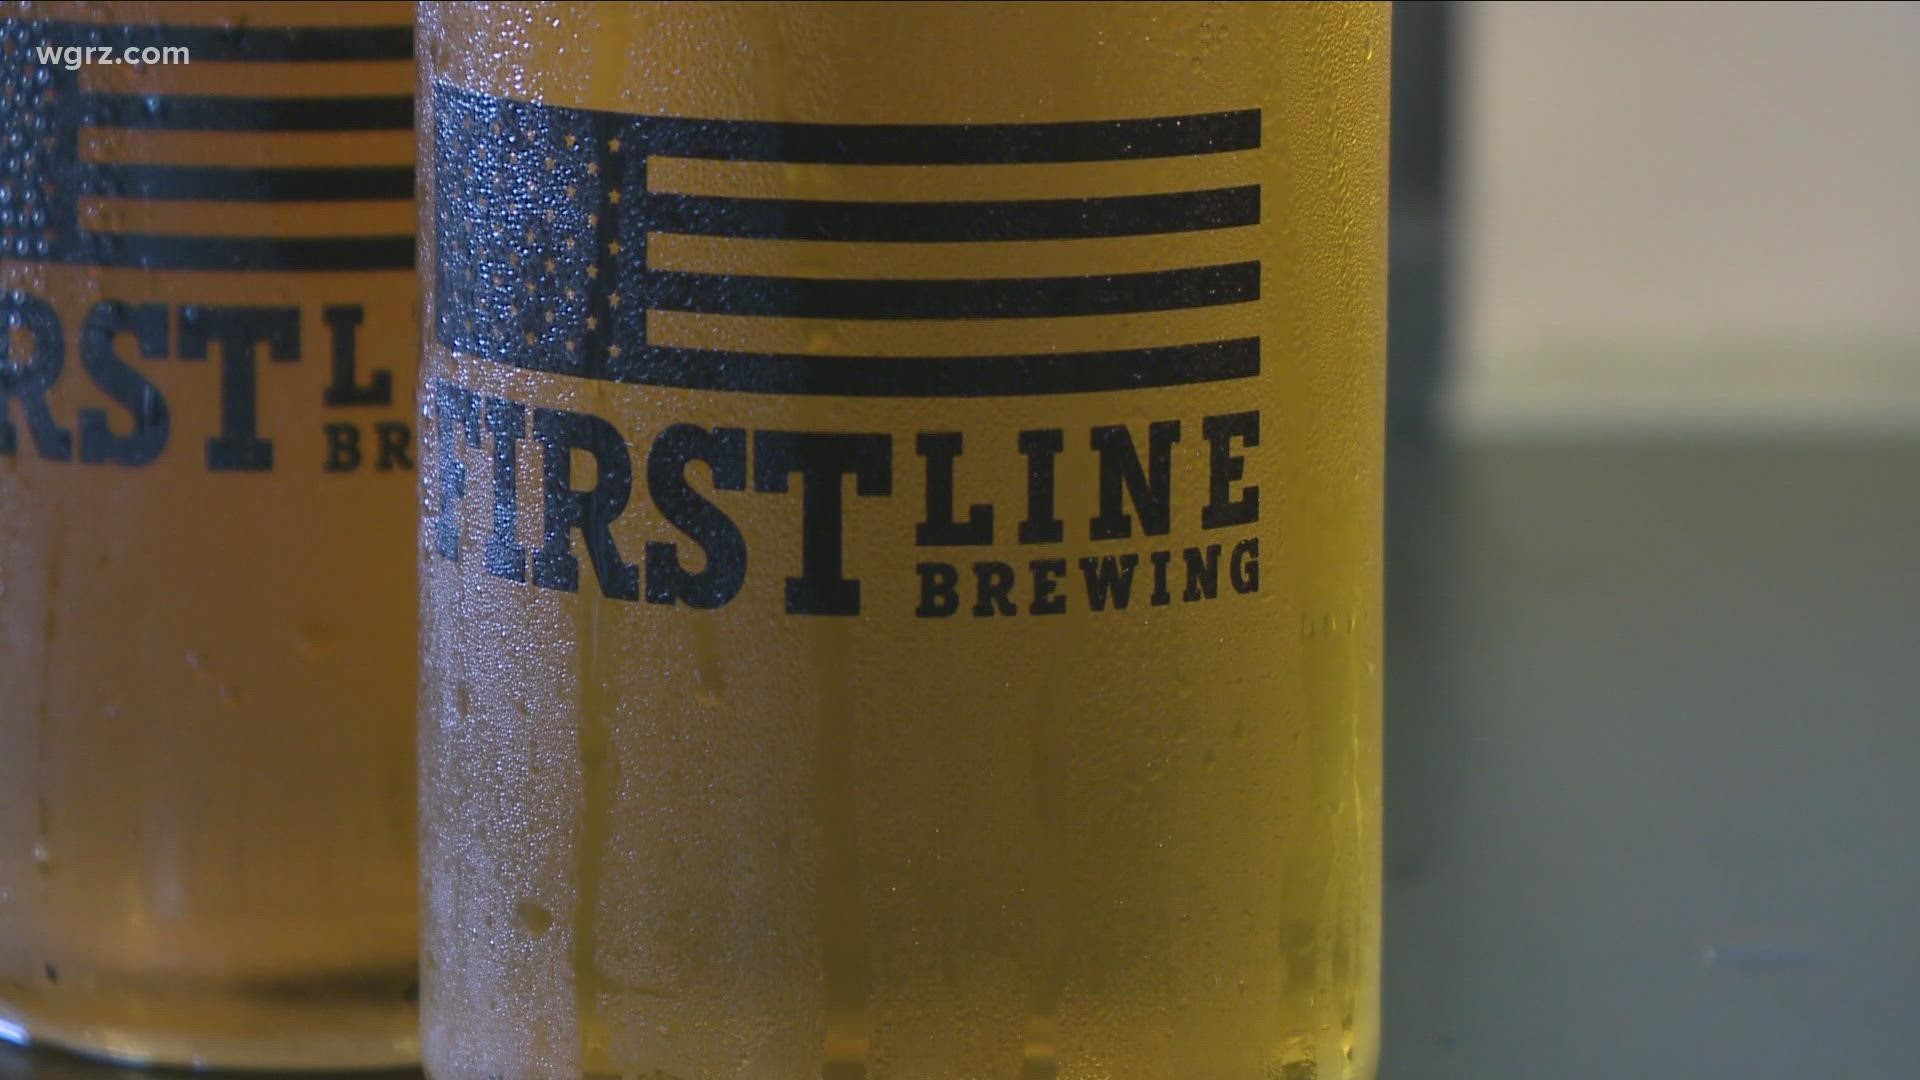 First Line Brewing posted a photo on their Facebook page of a display of 13 ice-cold glasses of their blonde ale called "We the People"